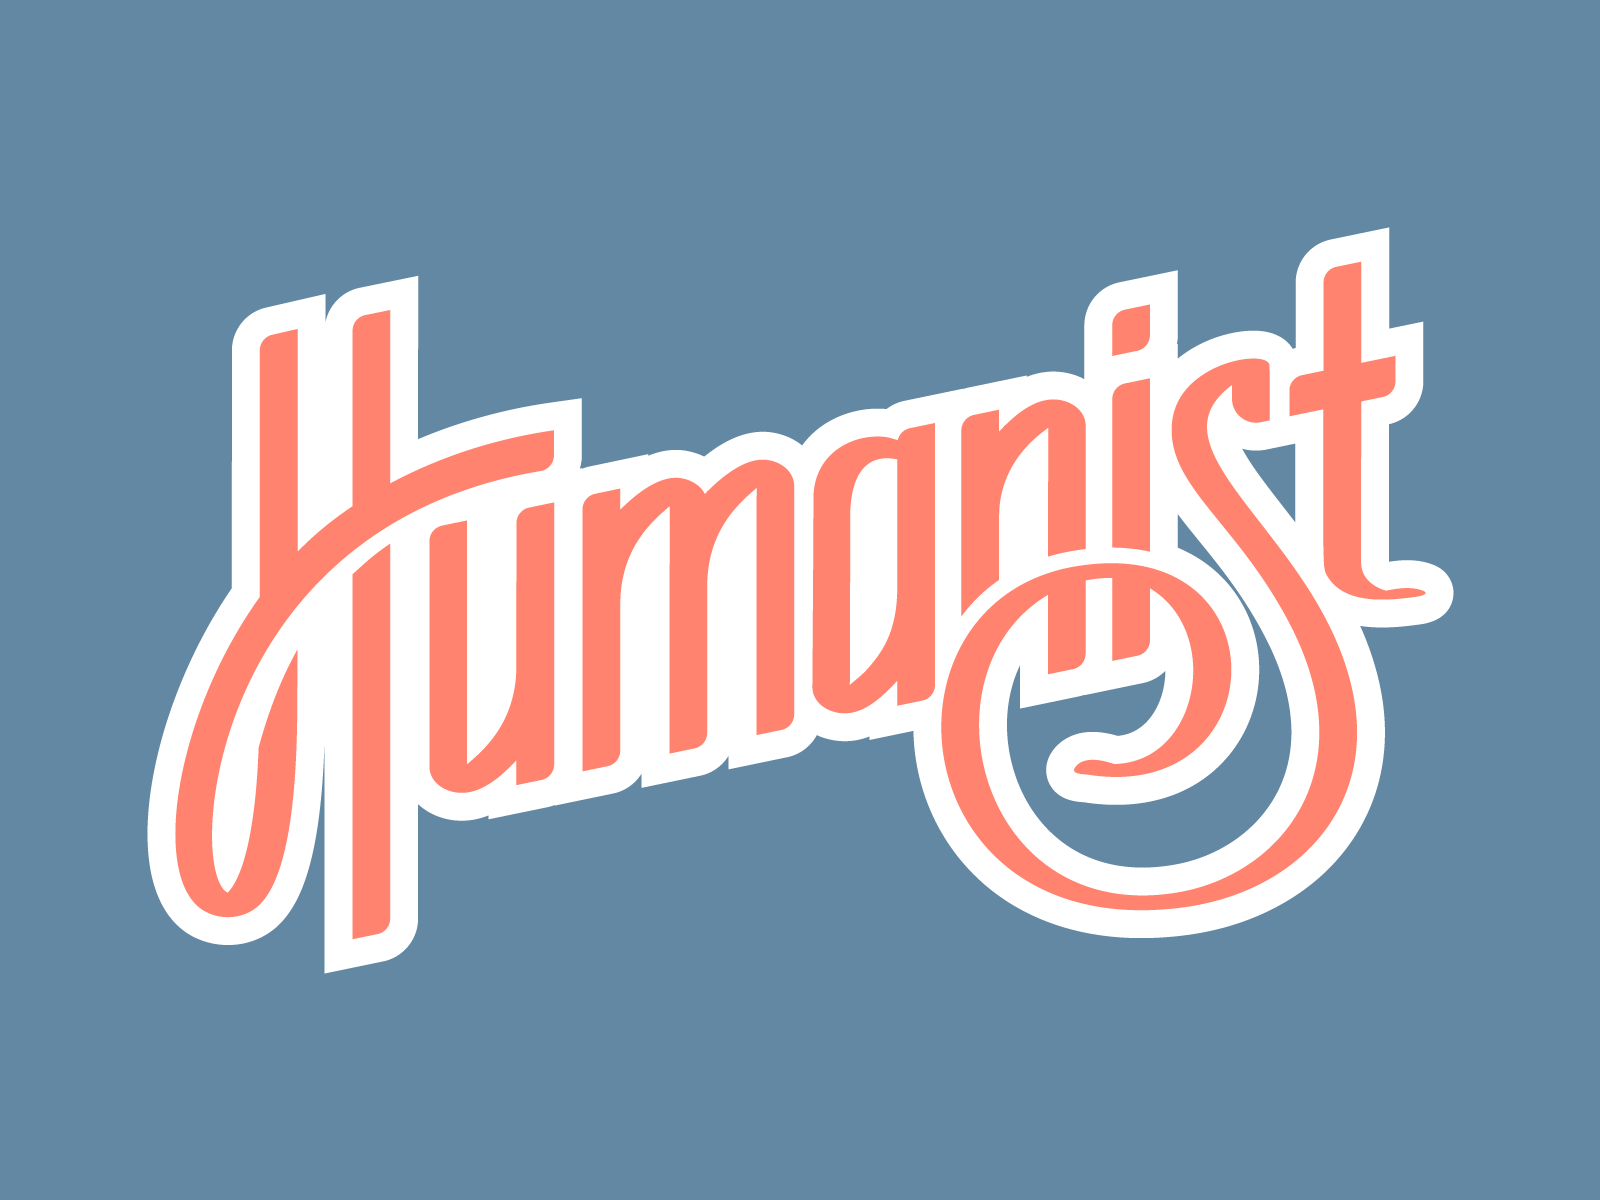 humanist typeface influence